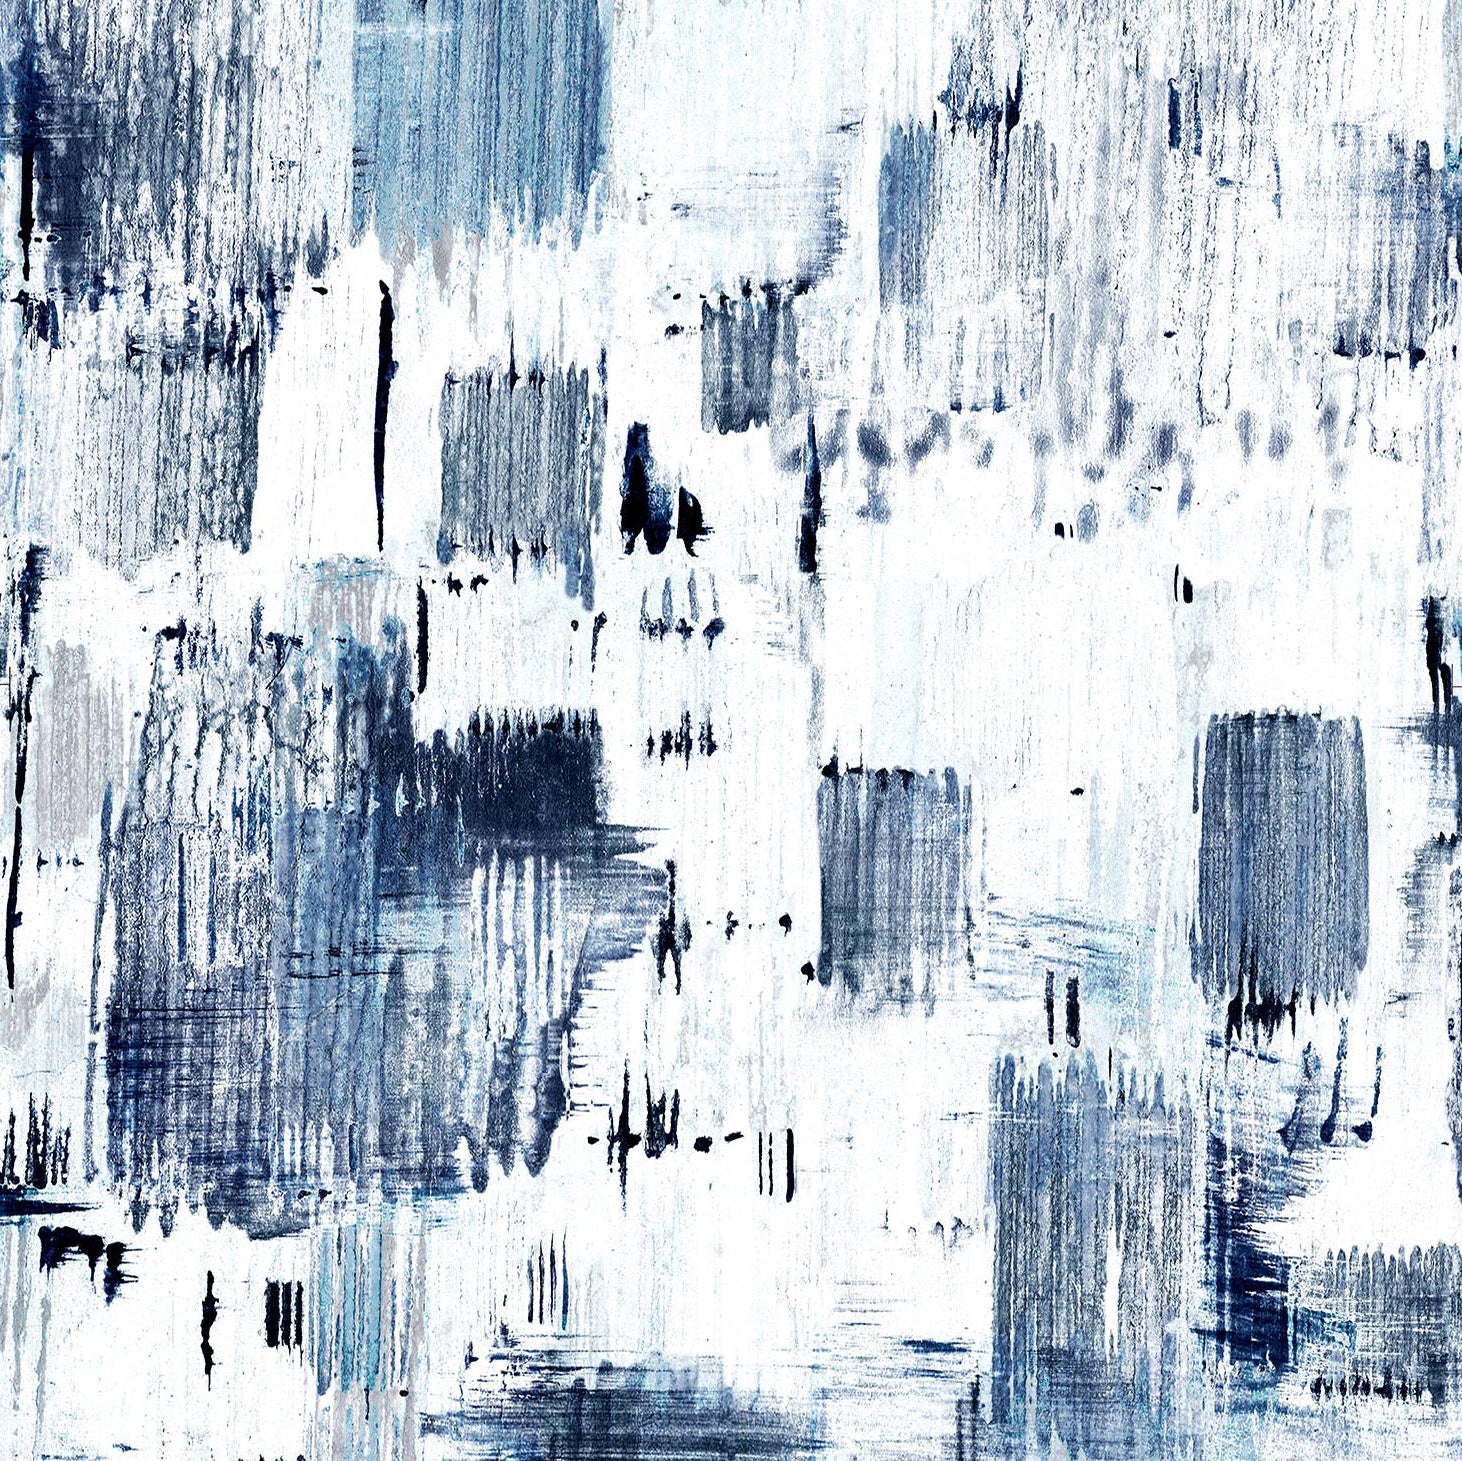 Detail of wallpaper in an abstract textural print in shades of navy and blue on a white field.